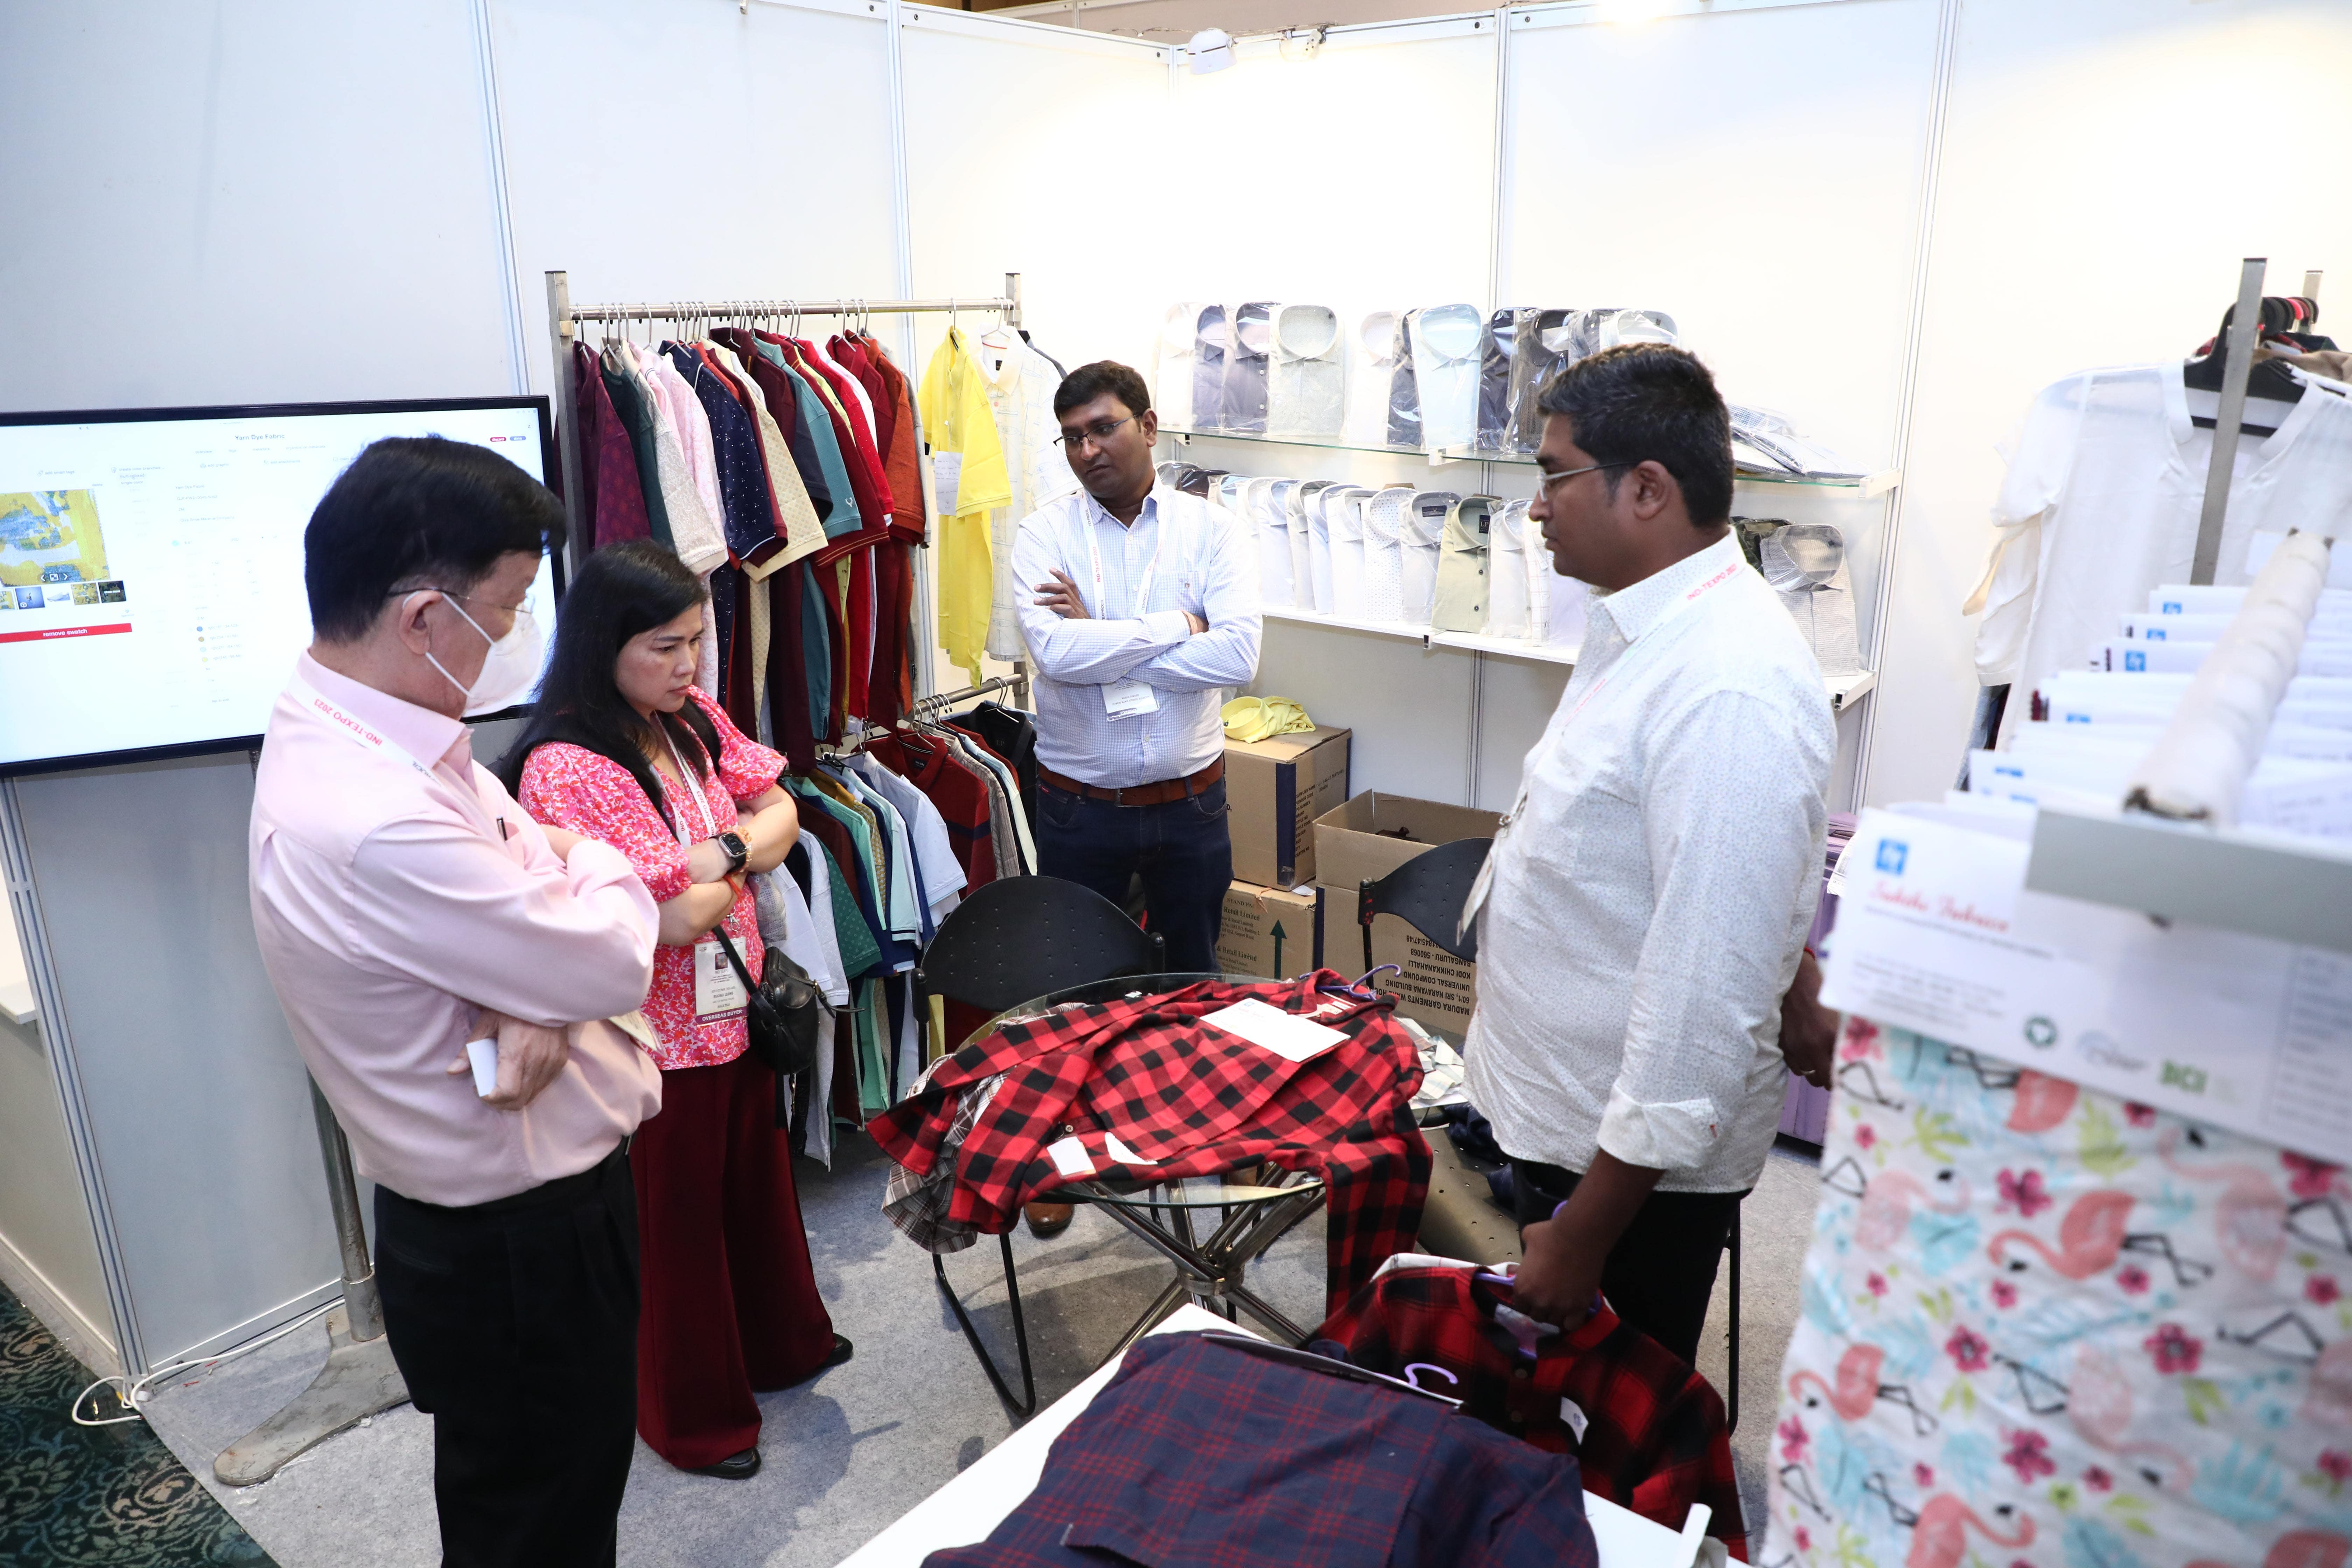 “Ind-Texpo”, Delhi from March 22-23, 2023